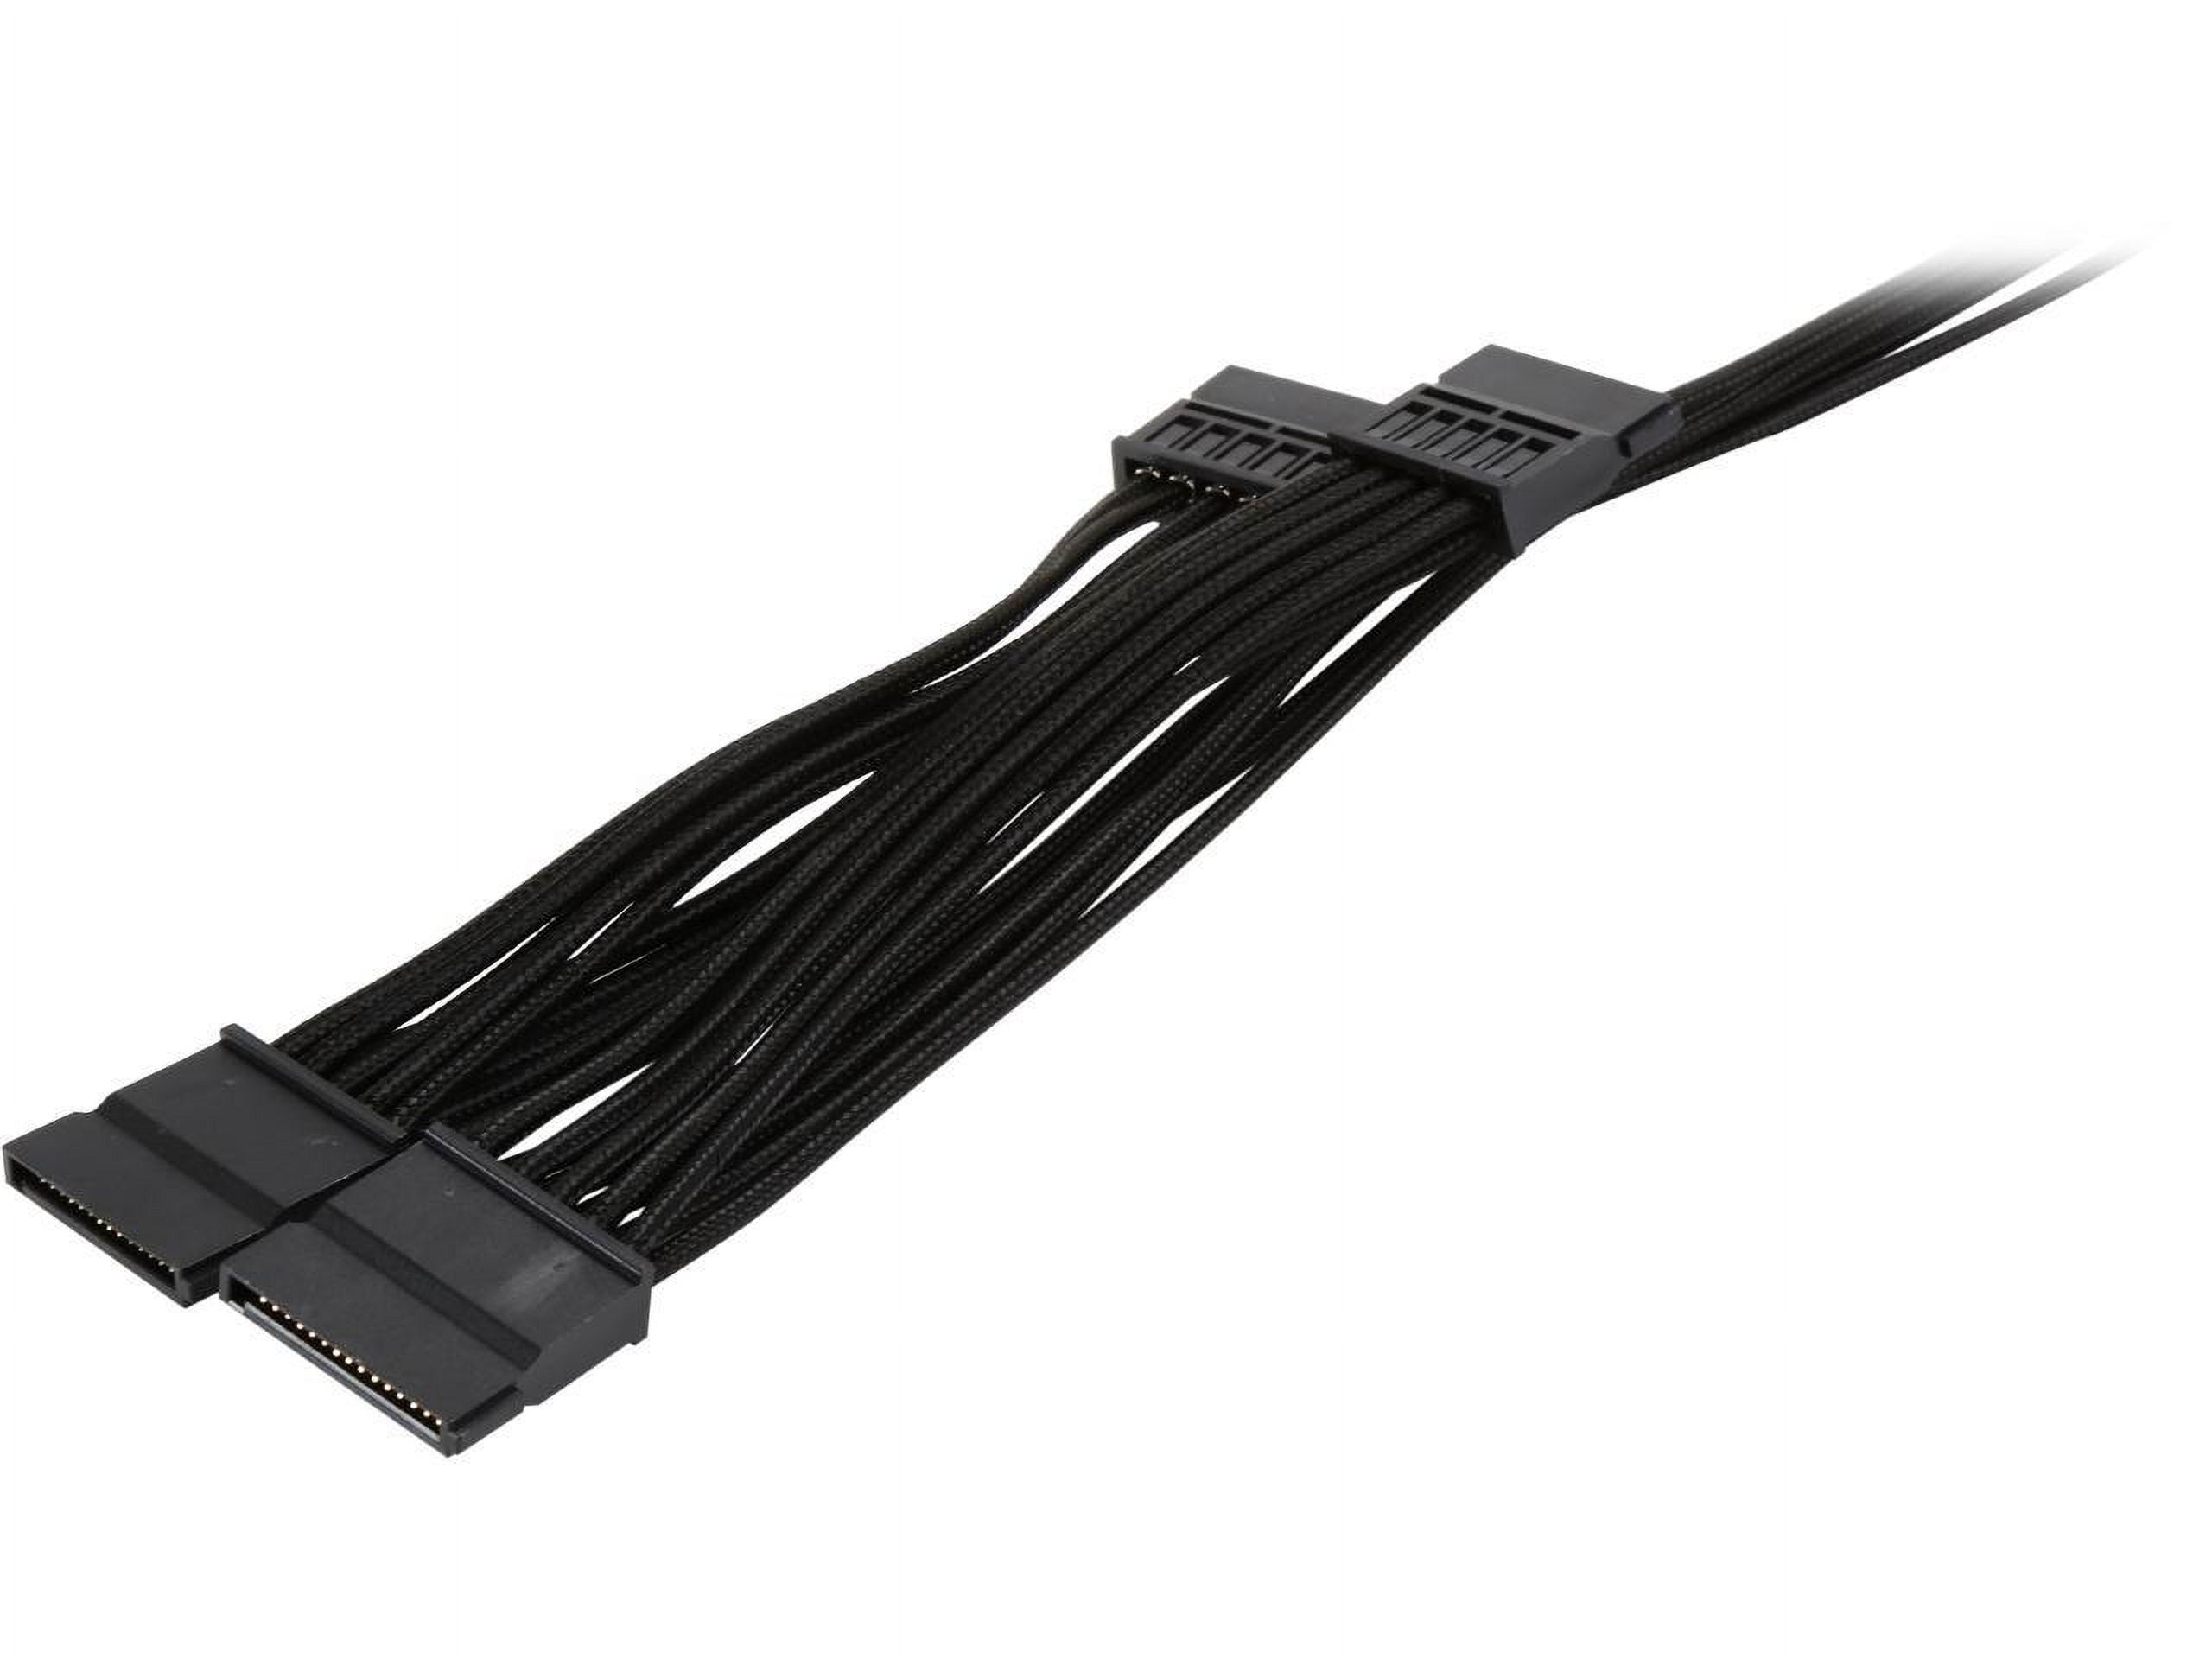 Cable, CP-8920186 Type Individually (Generation ft. (0.75m) Premium 3) 2.46 Sleeved 4 Corsair SATA